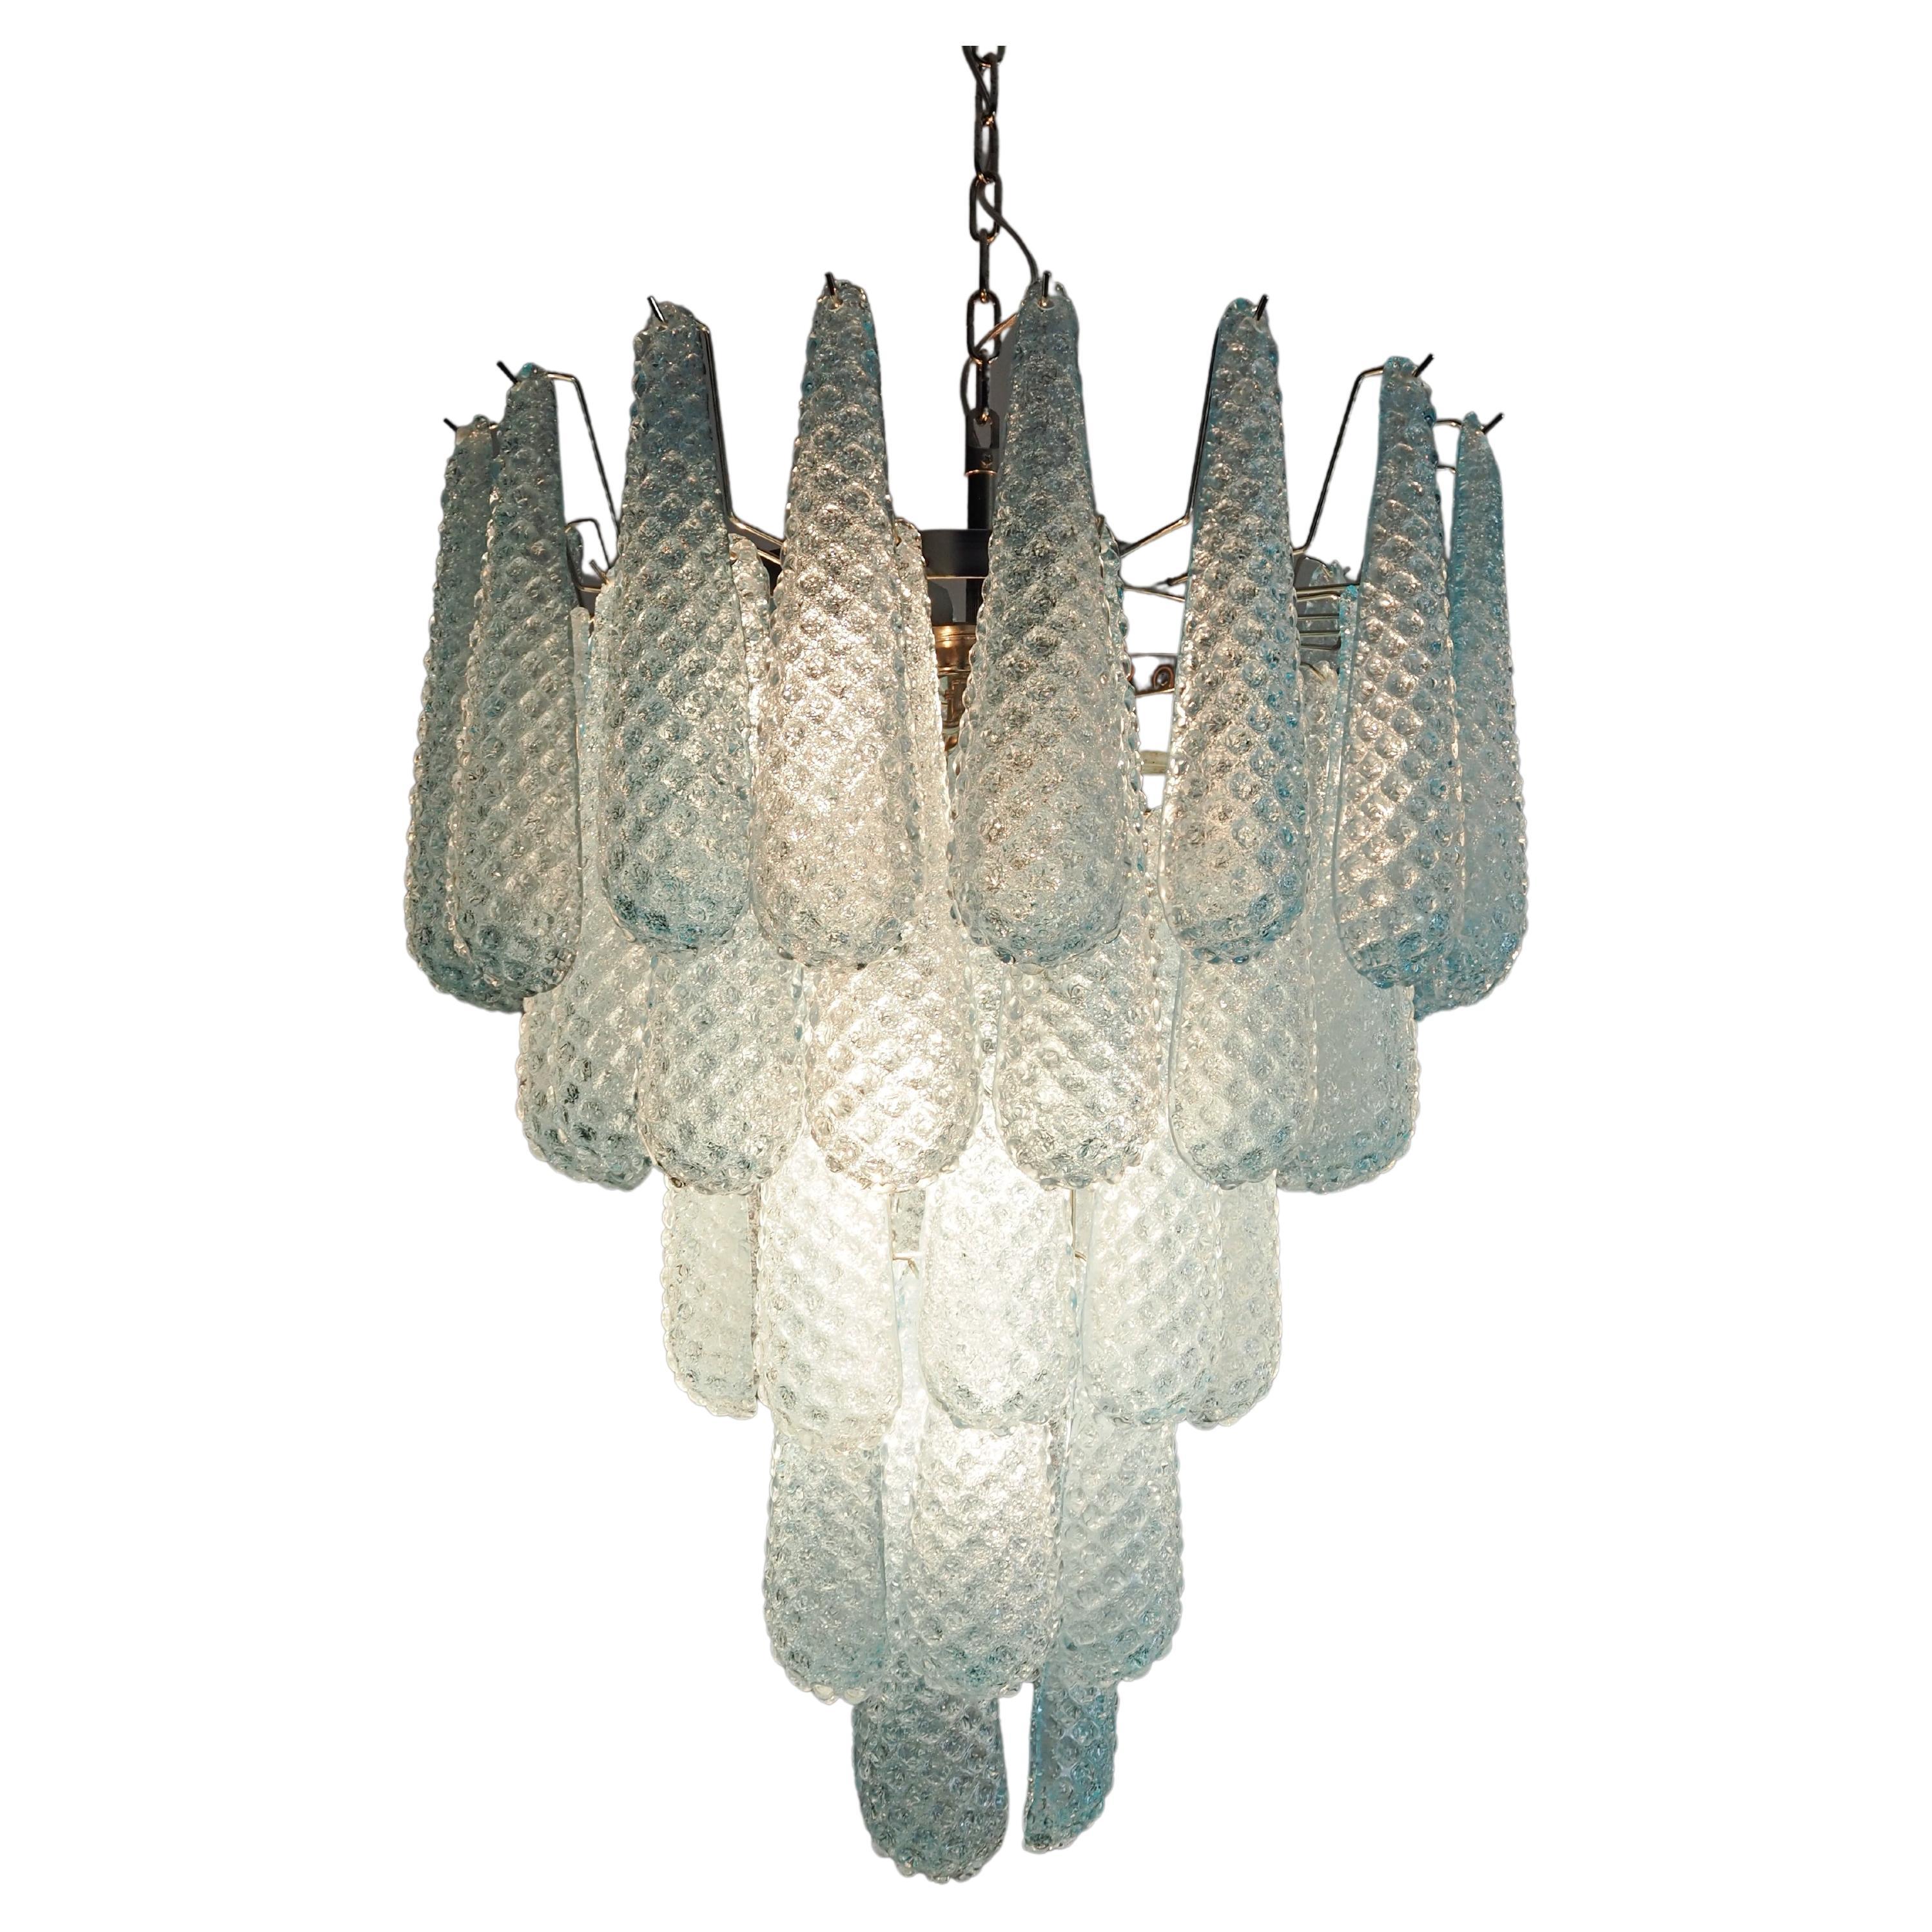 Huge Italian vintage Murano chandelier made by 52 glass petals (BLUE crystal, smooth outside, with crystal powder and then rough inside.) in a chrome frame.
Period: late XX century
Dimensions: 55,10 inches (140 cm) height with chain; 29,50 inches